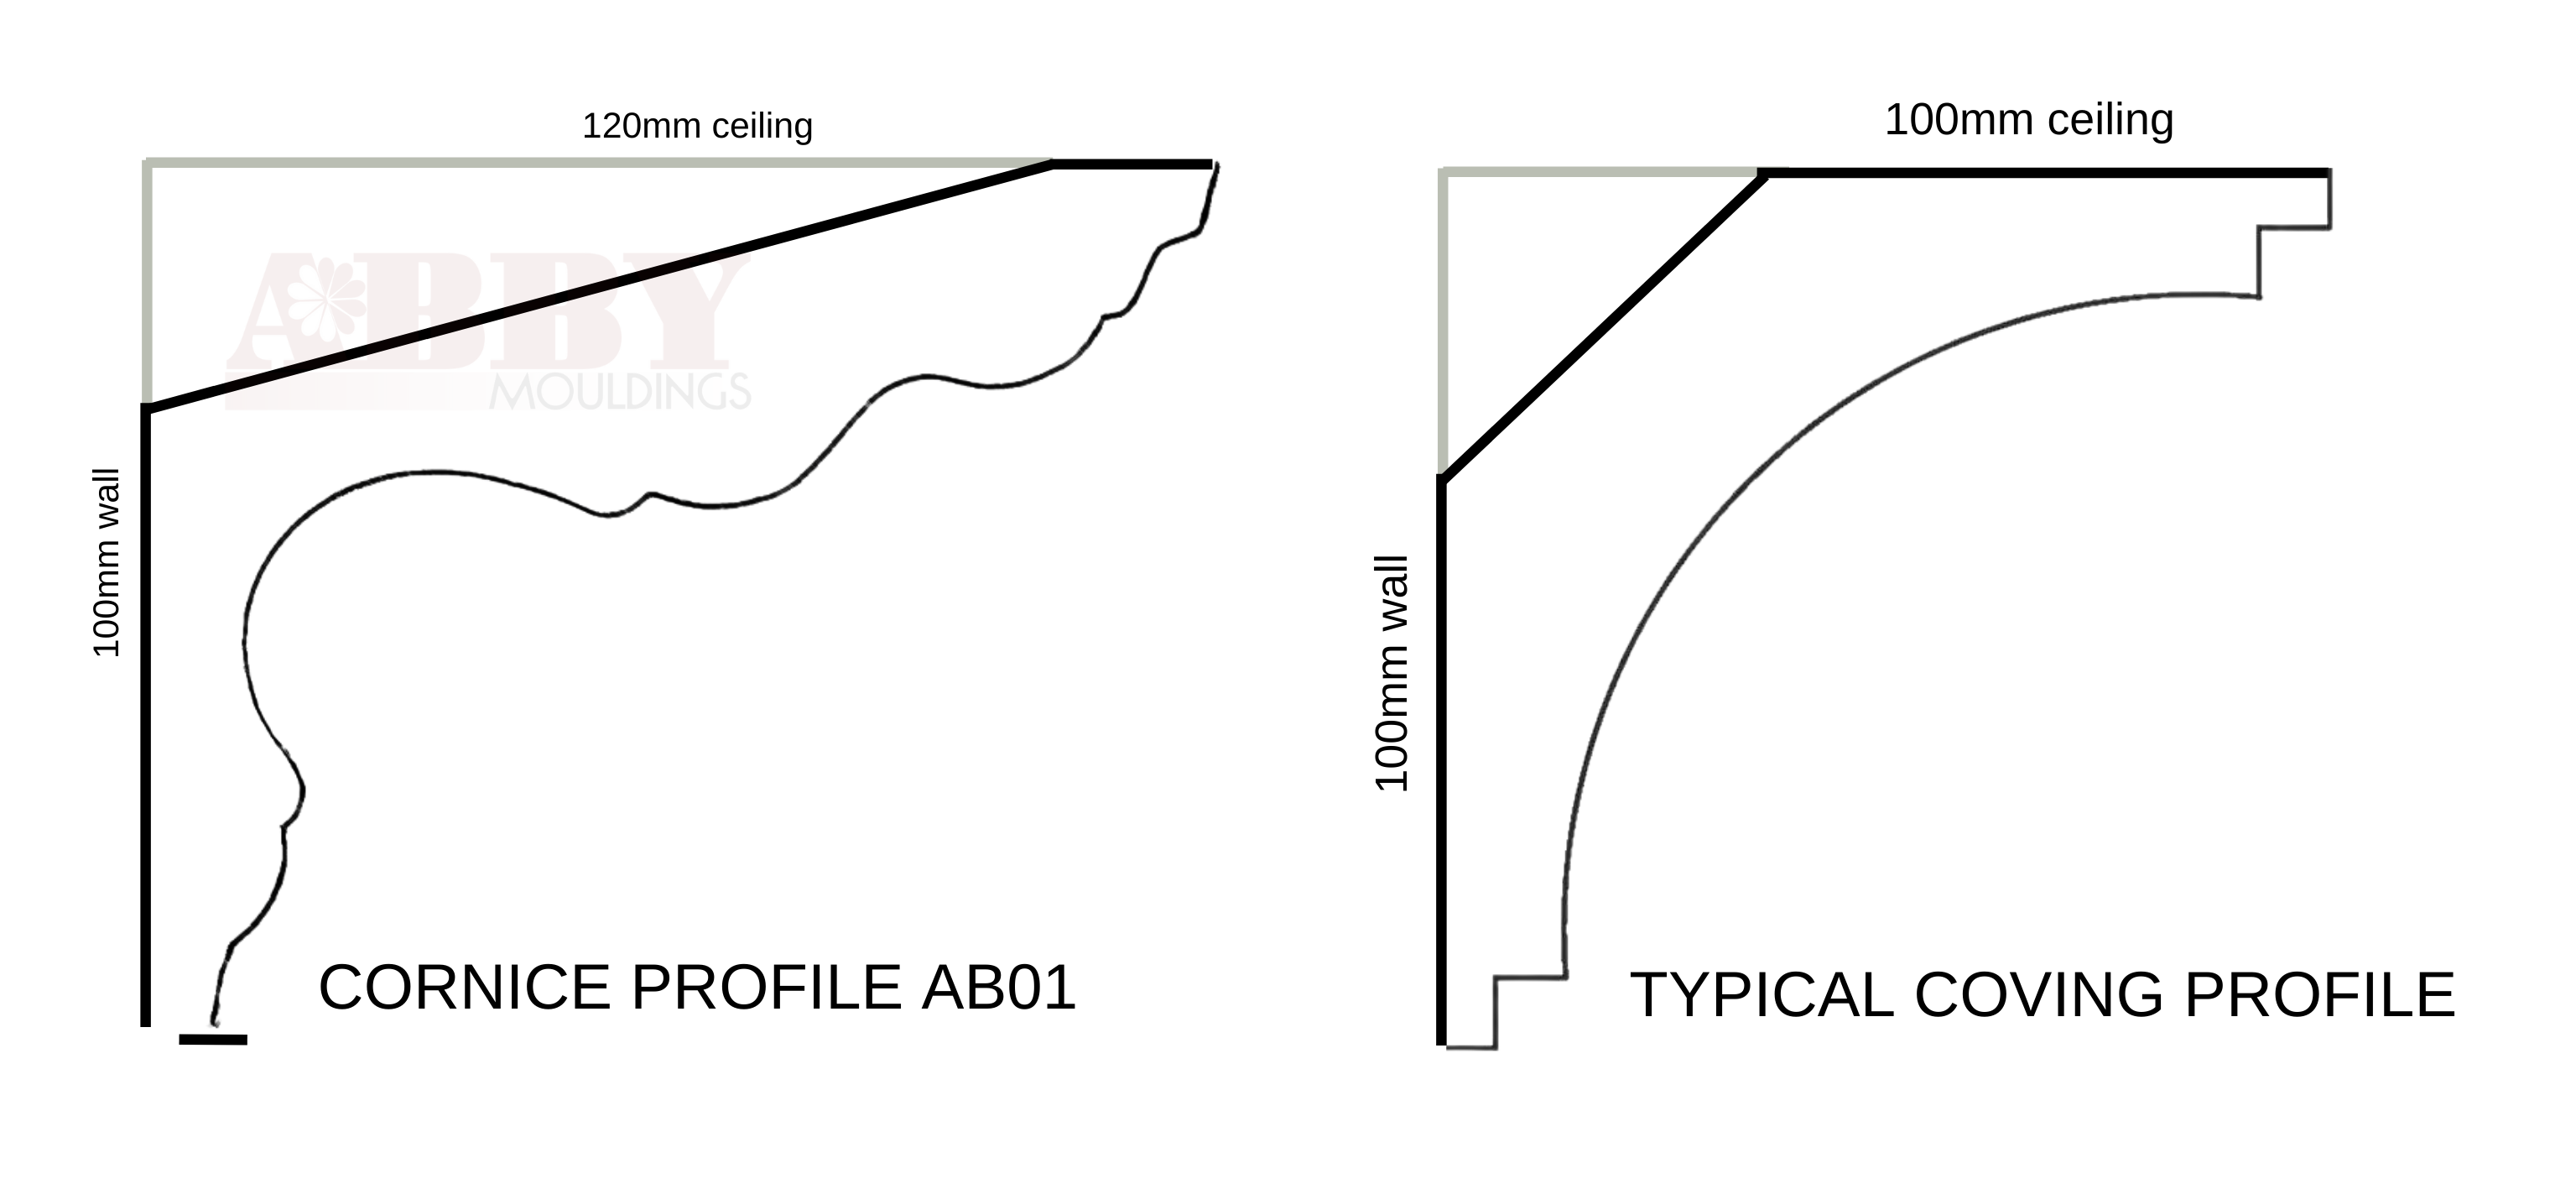 A typical coving profile along with a more ornate cornice profile